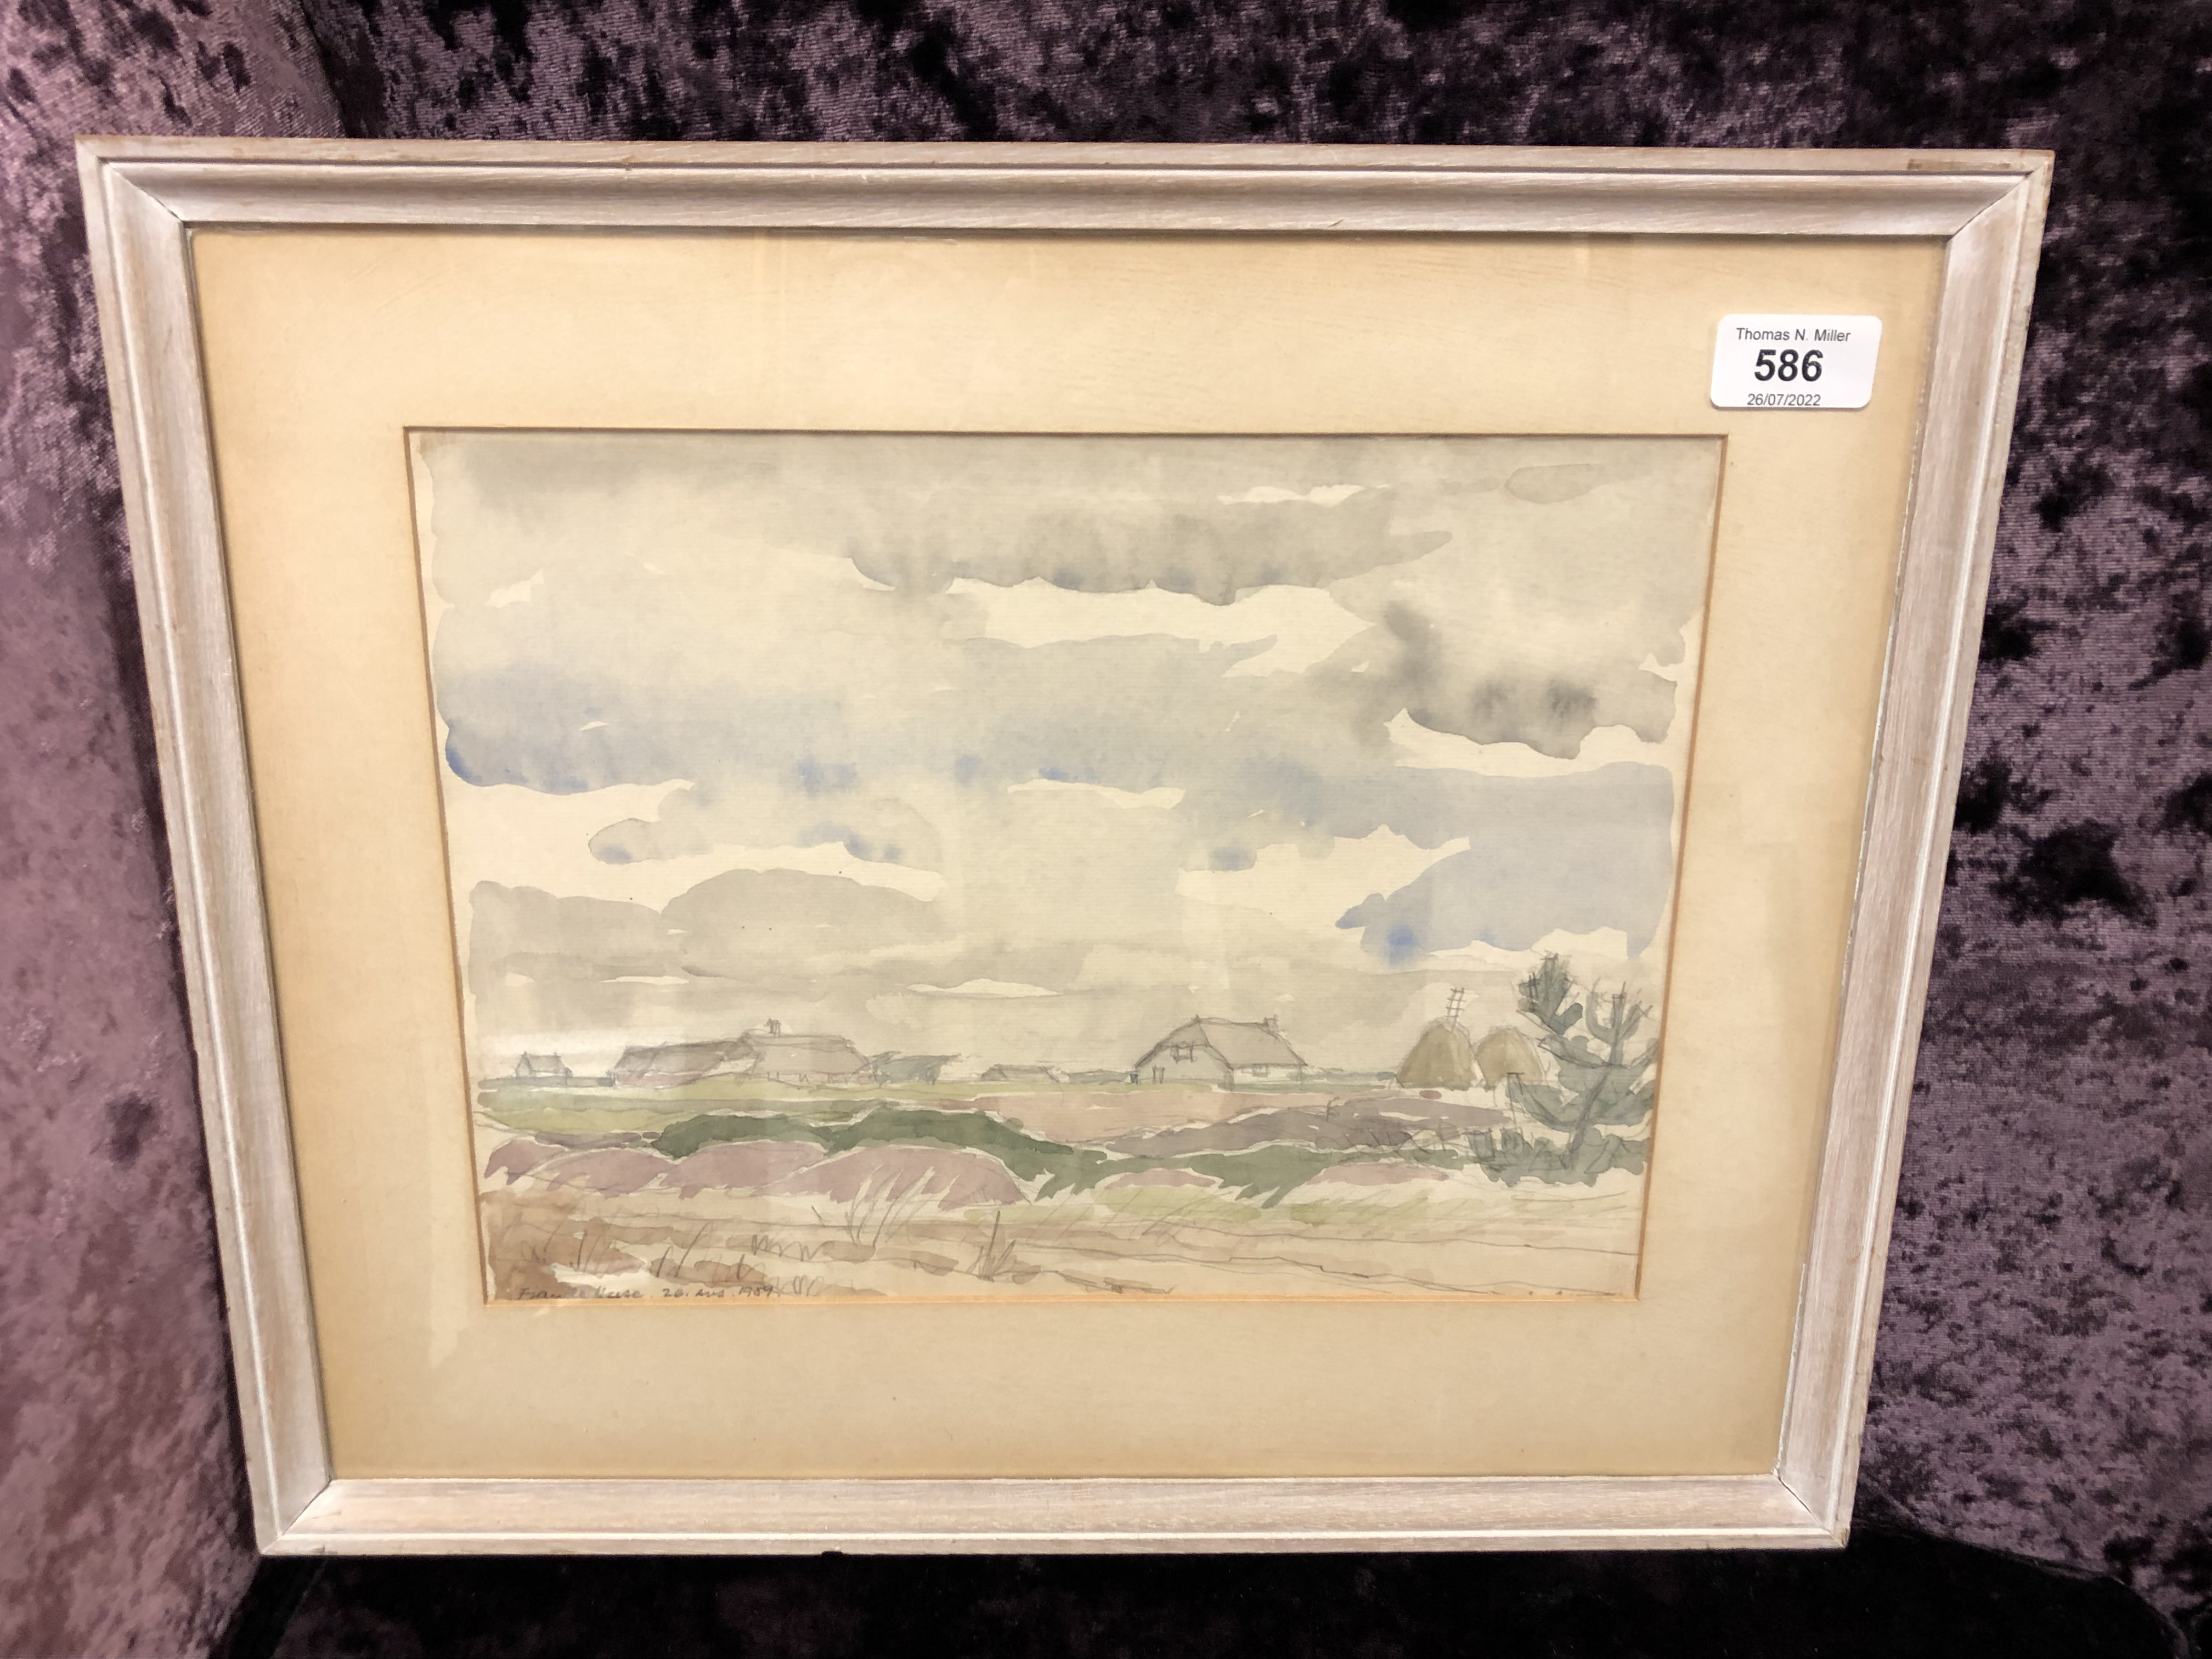 Continental school : rural landscape, watercolour, indistinctly signed,